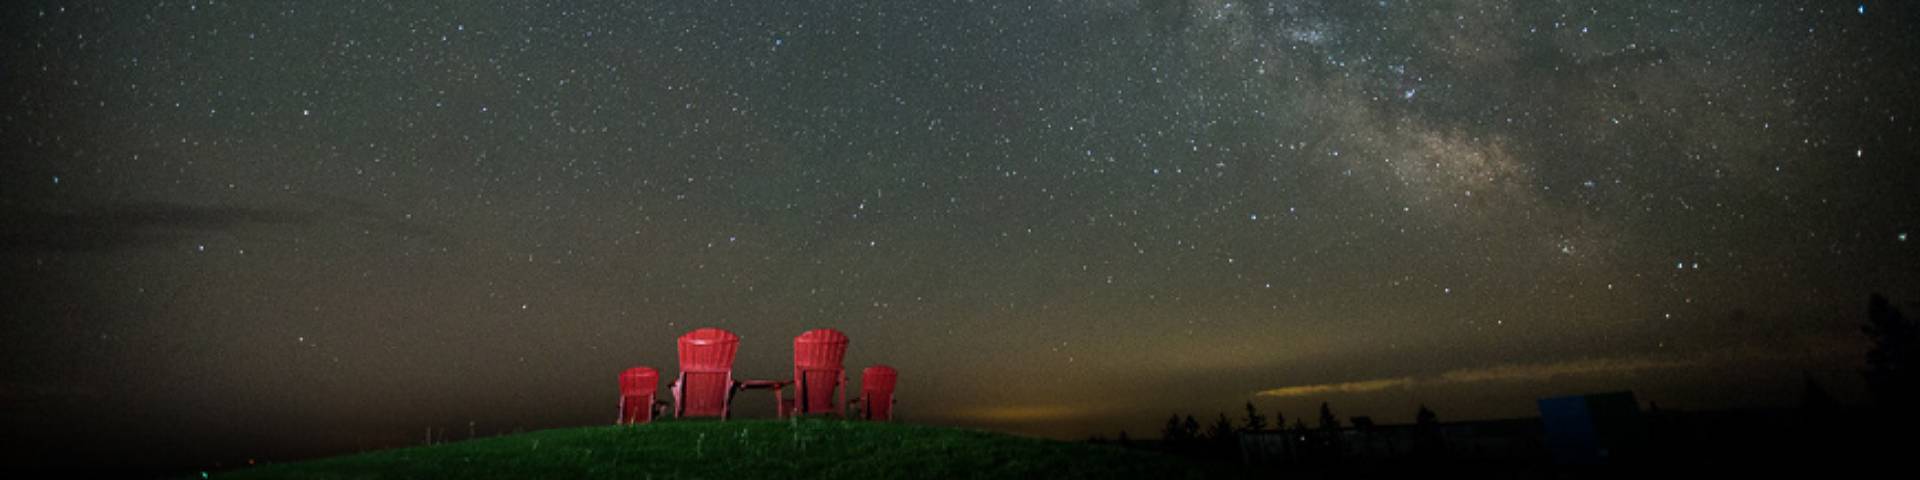 Four red chairs under a dark, starry sky